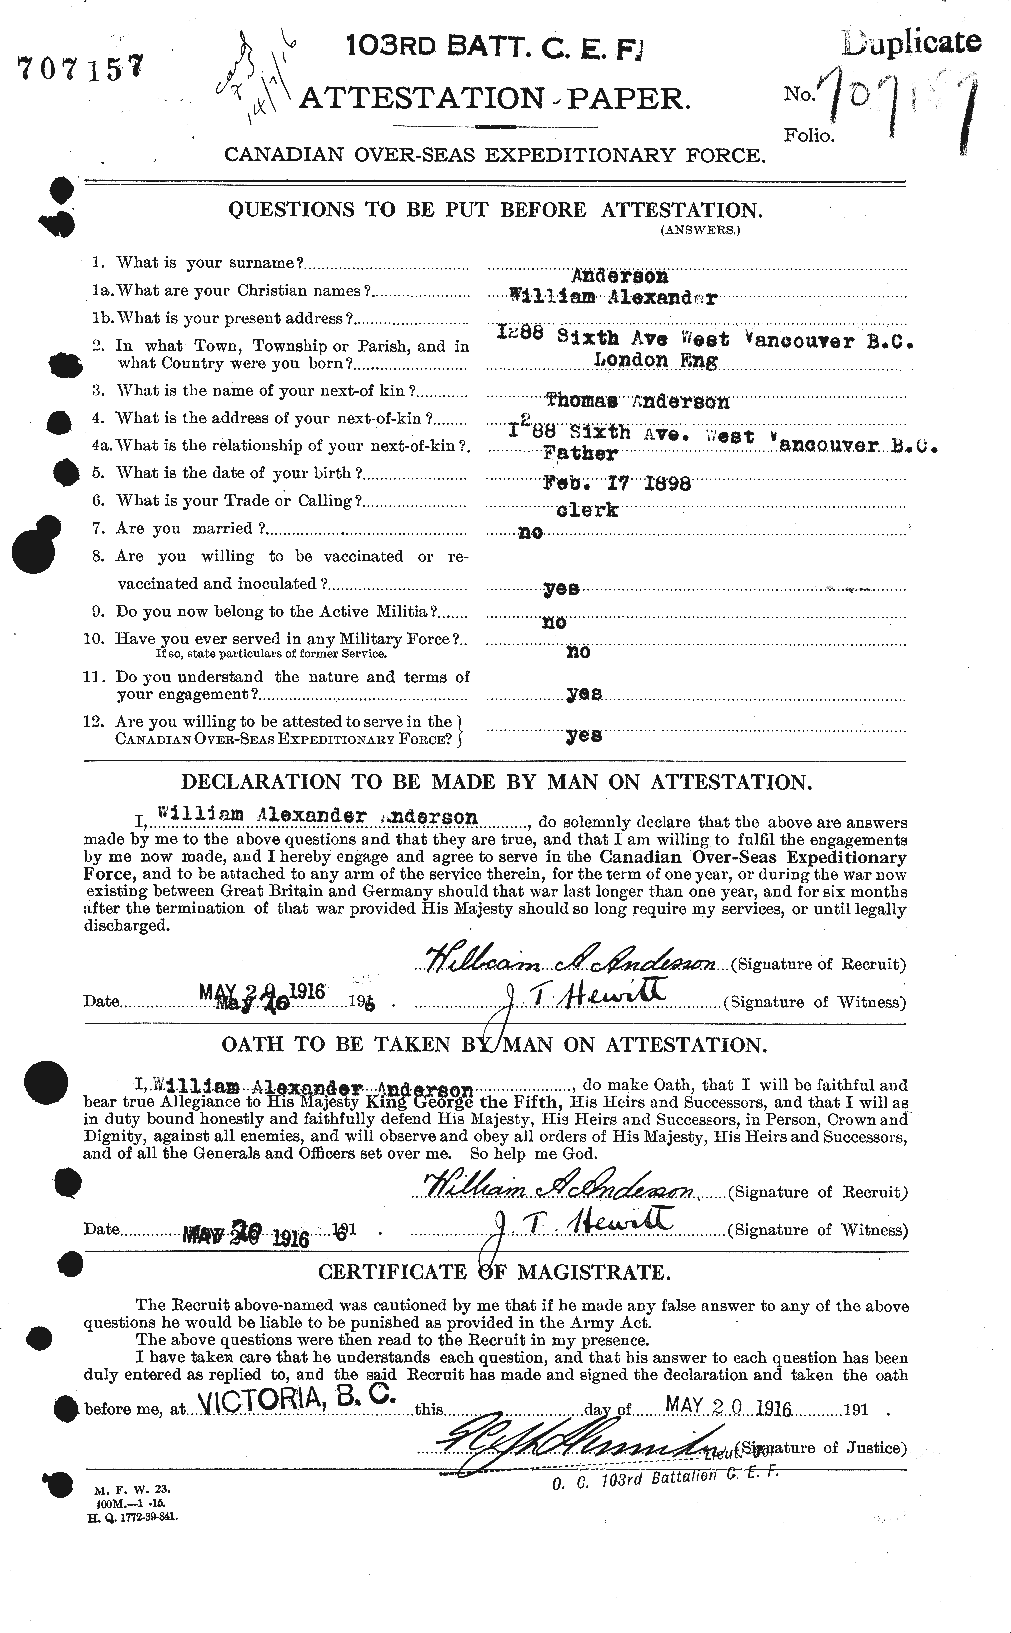 Personnel Records of the First World War - CEF 210773a